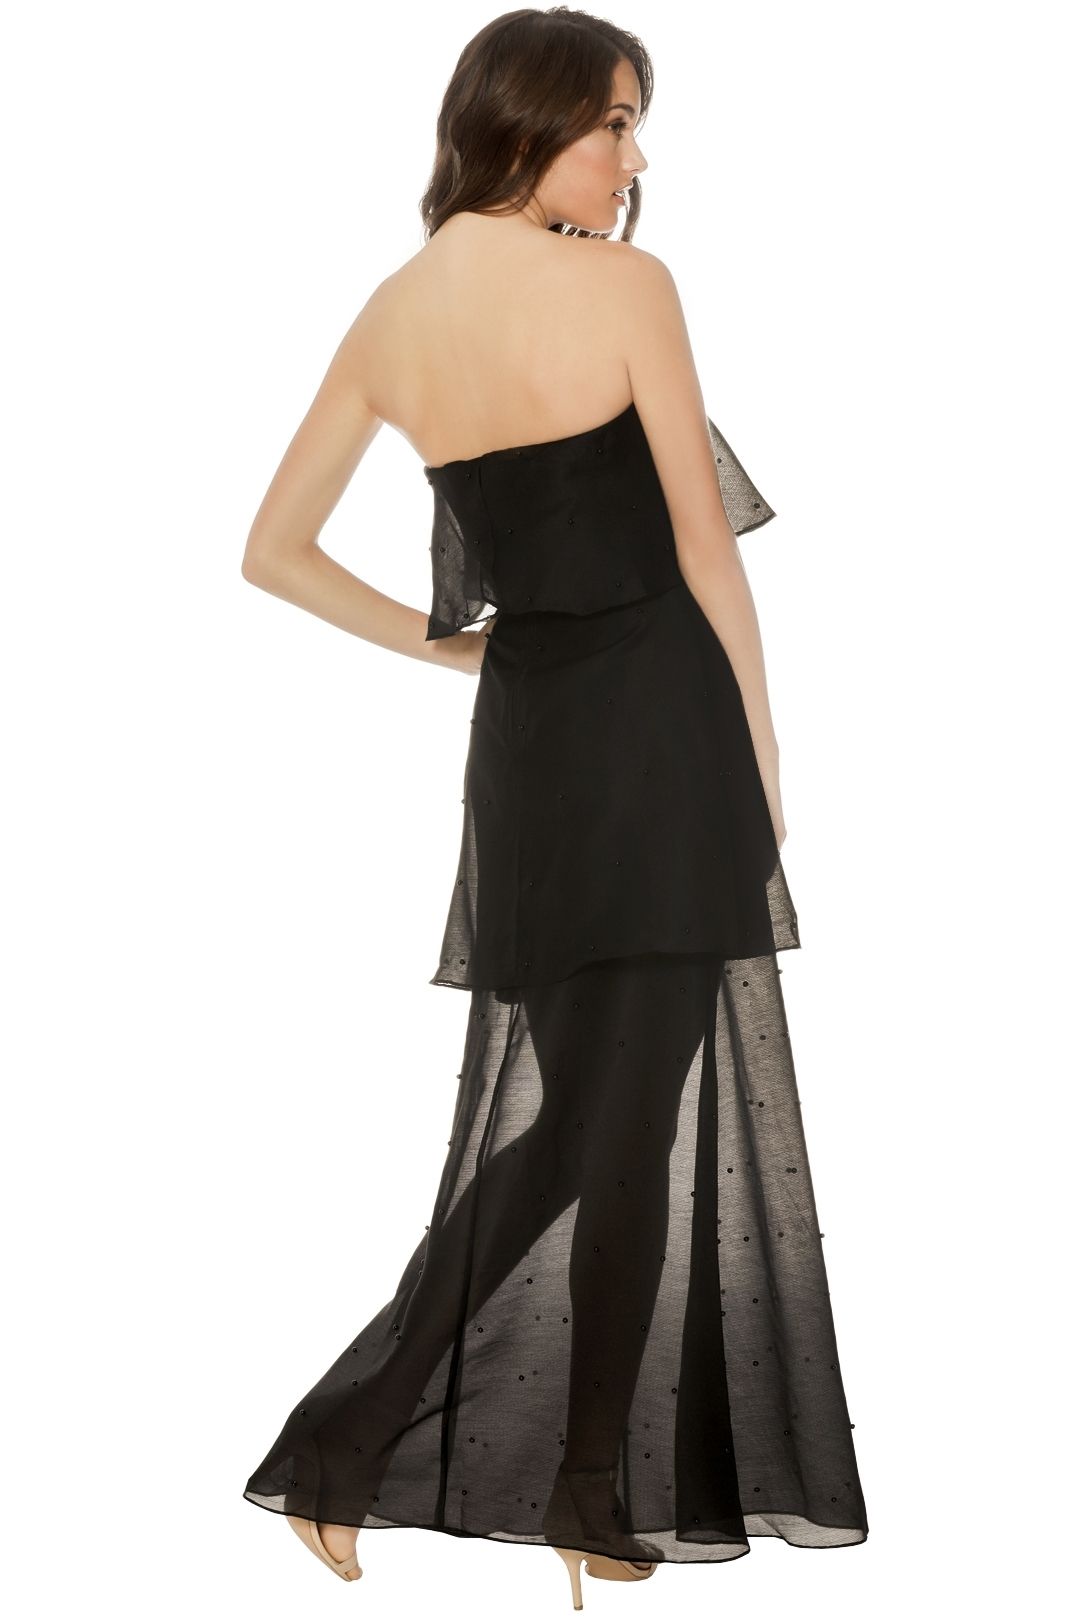 Keepsake The Label - Call Me Gown - Black - Back